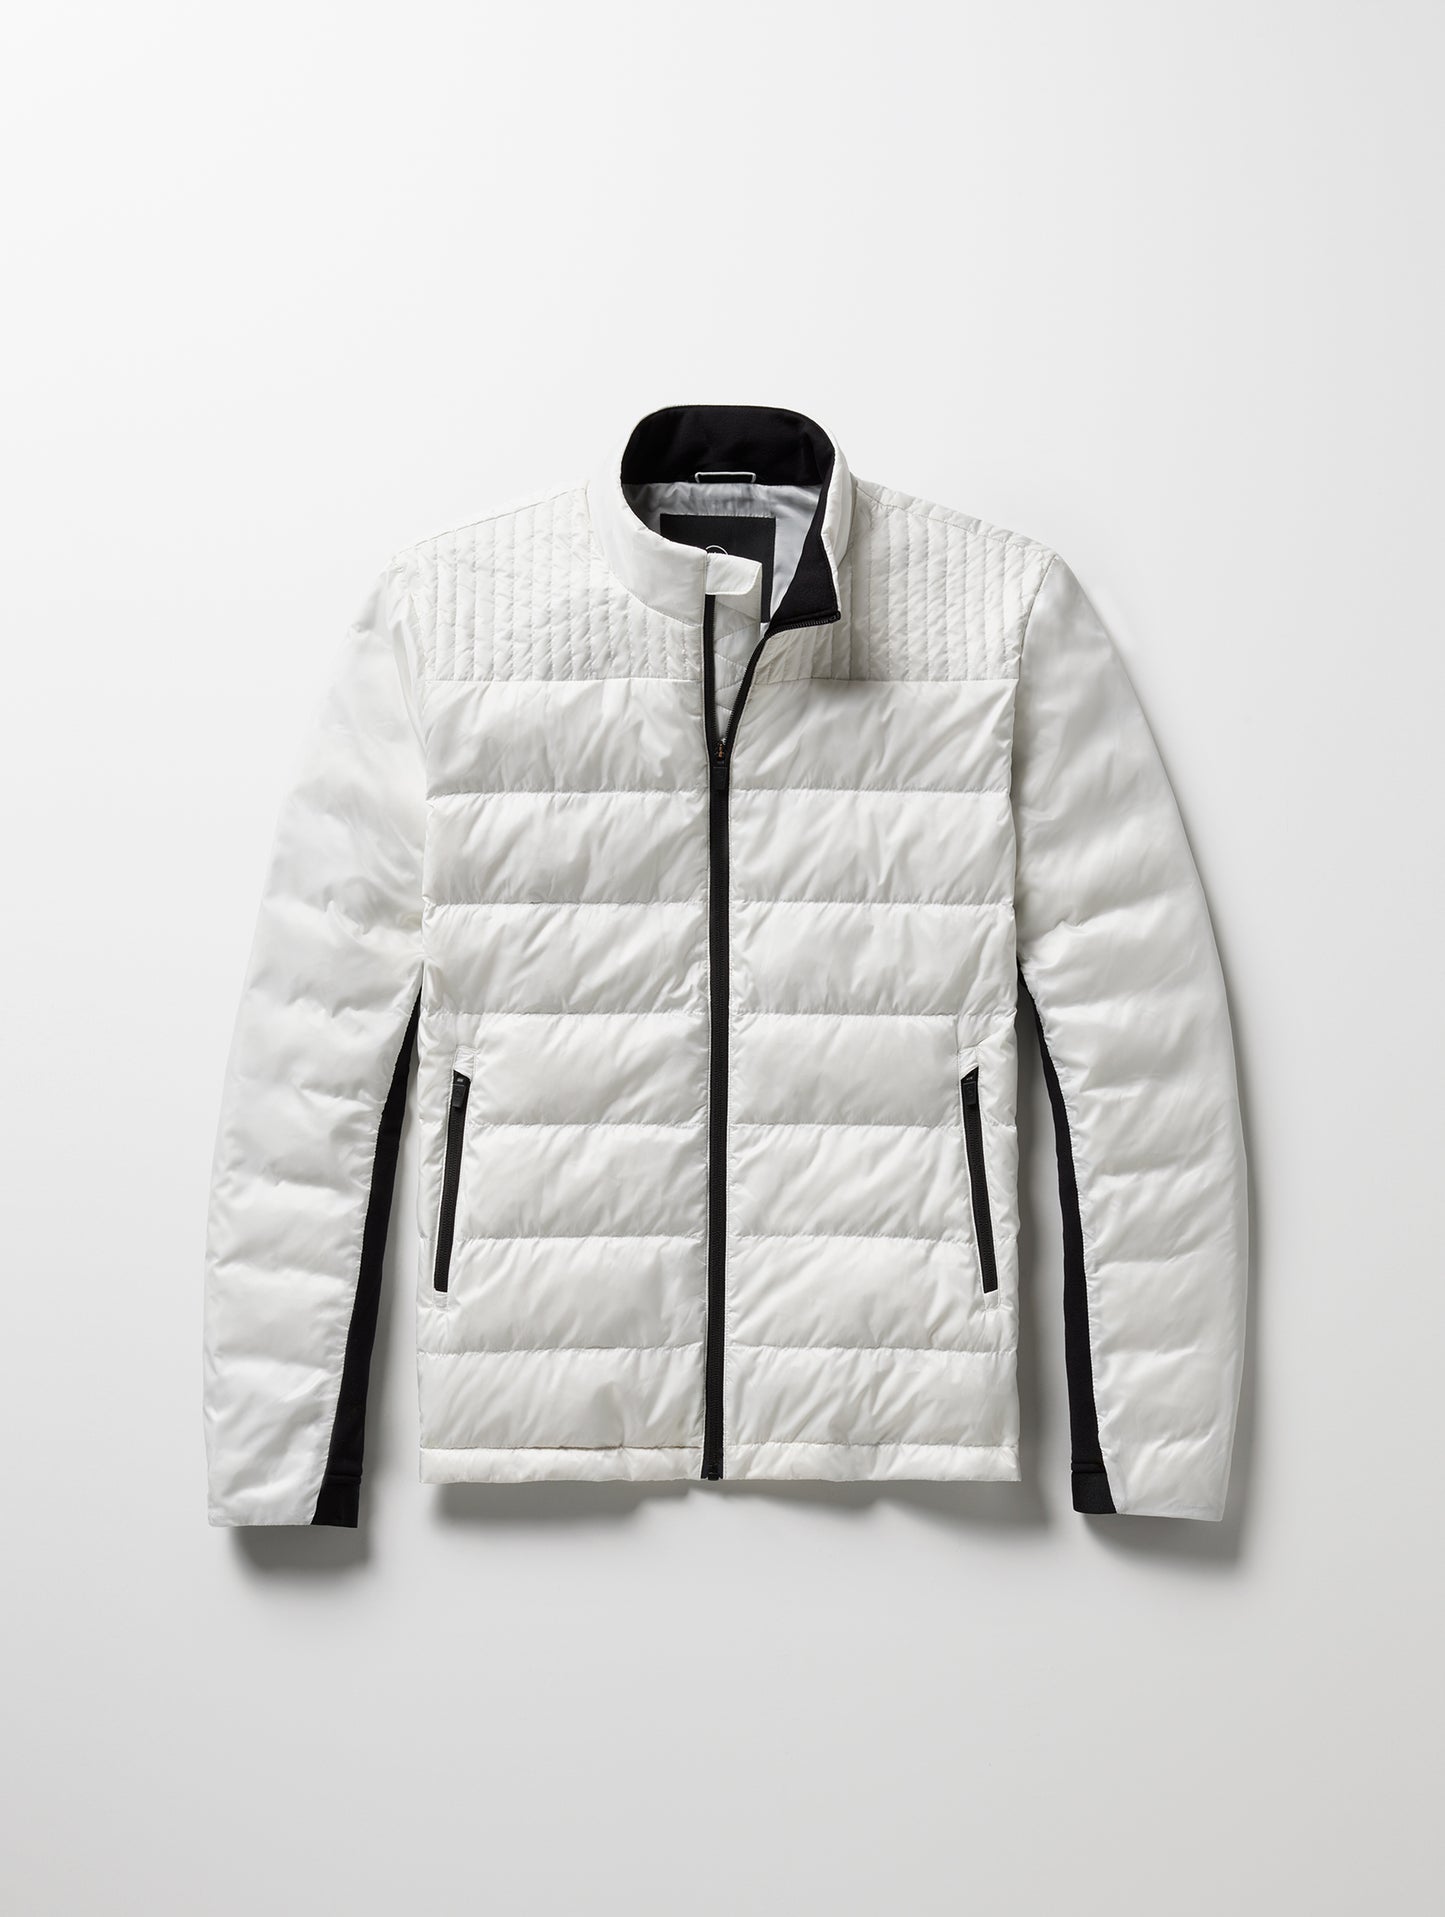 white insulated jacket from AETHER Apparel